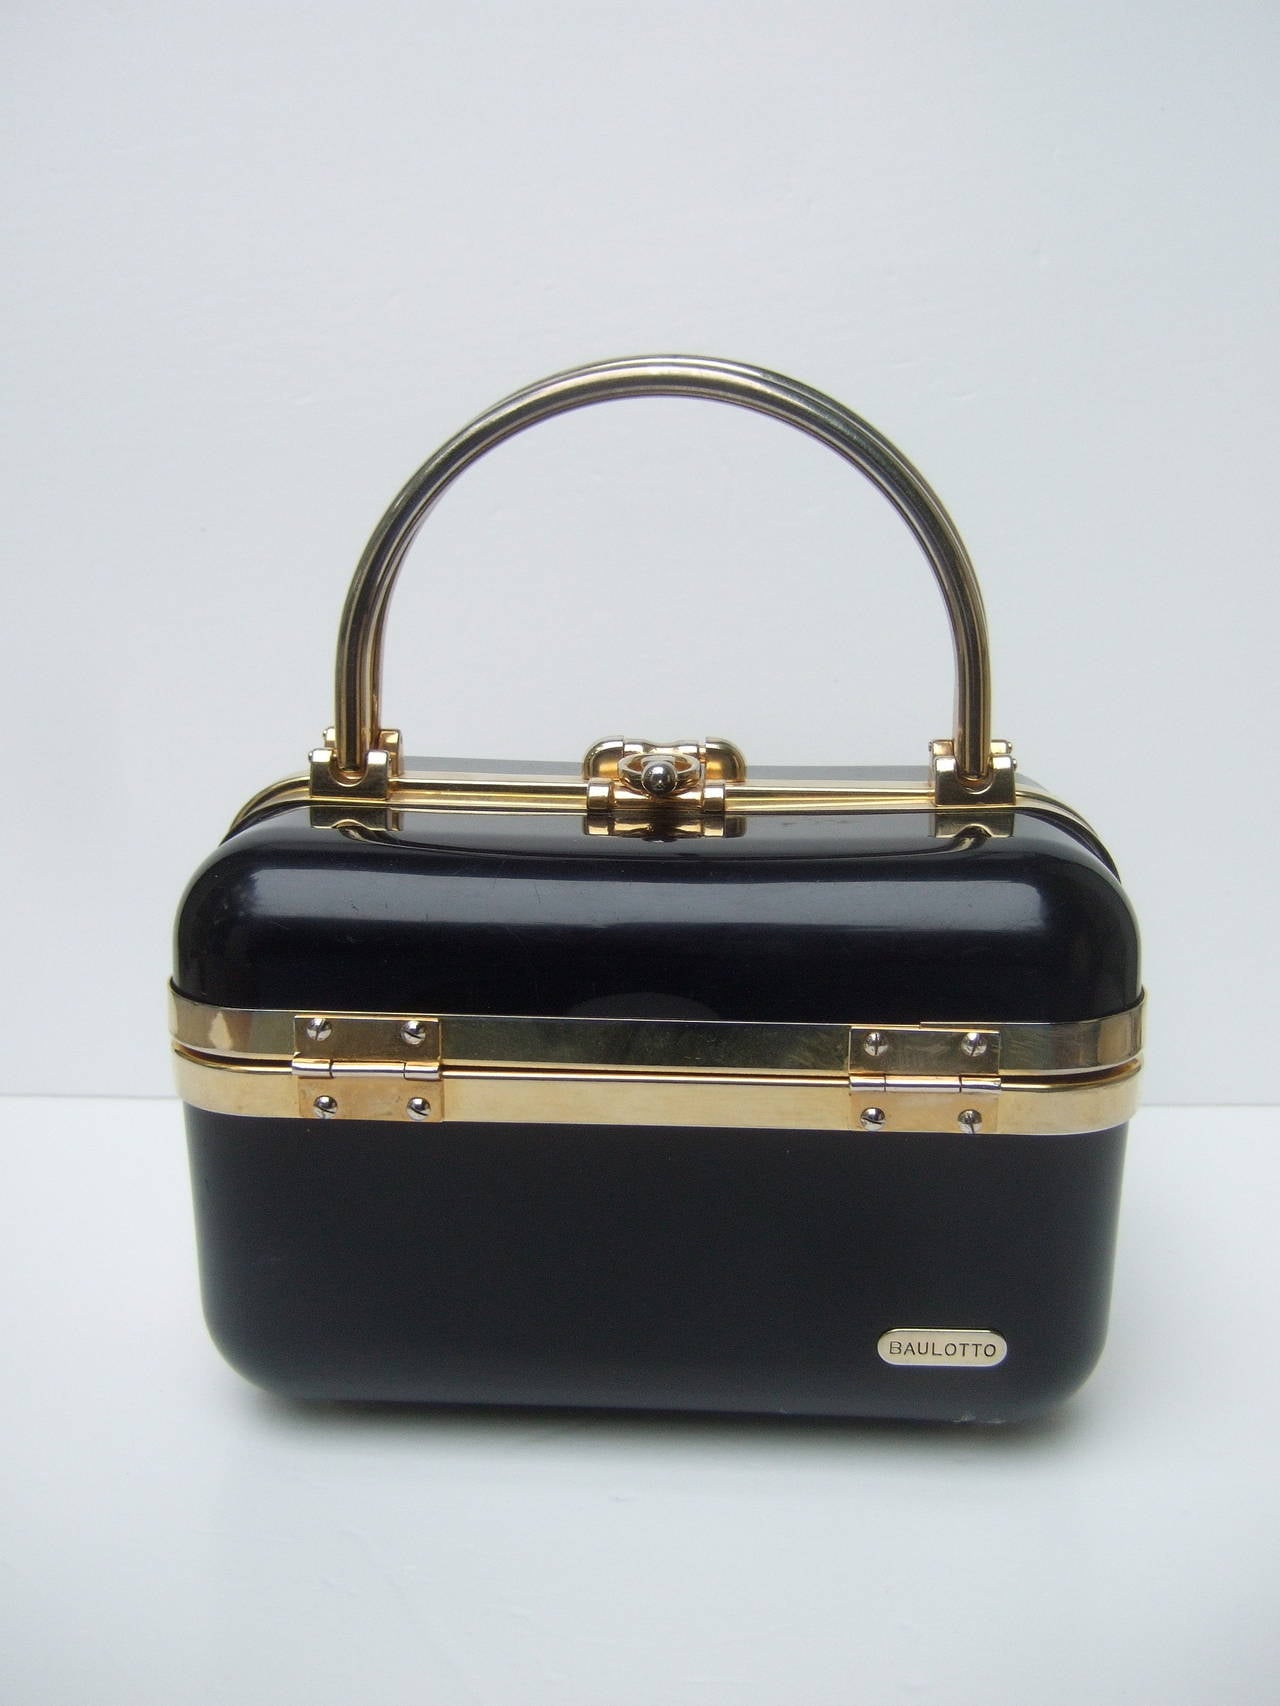 Sleek 1970s Italian ebony lucite handbag designed by Baulotto 
The posh Italian handbag is designed with glossy jet black lucite
The molded panels are accented with gilt metal bands & hardware

The interior of the box style handbag is lined in